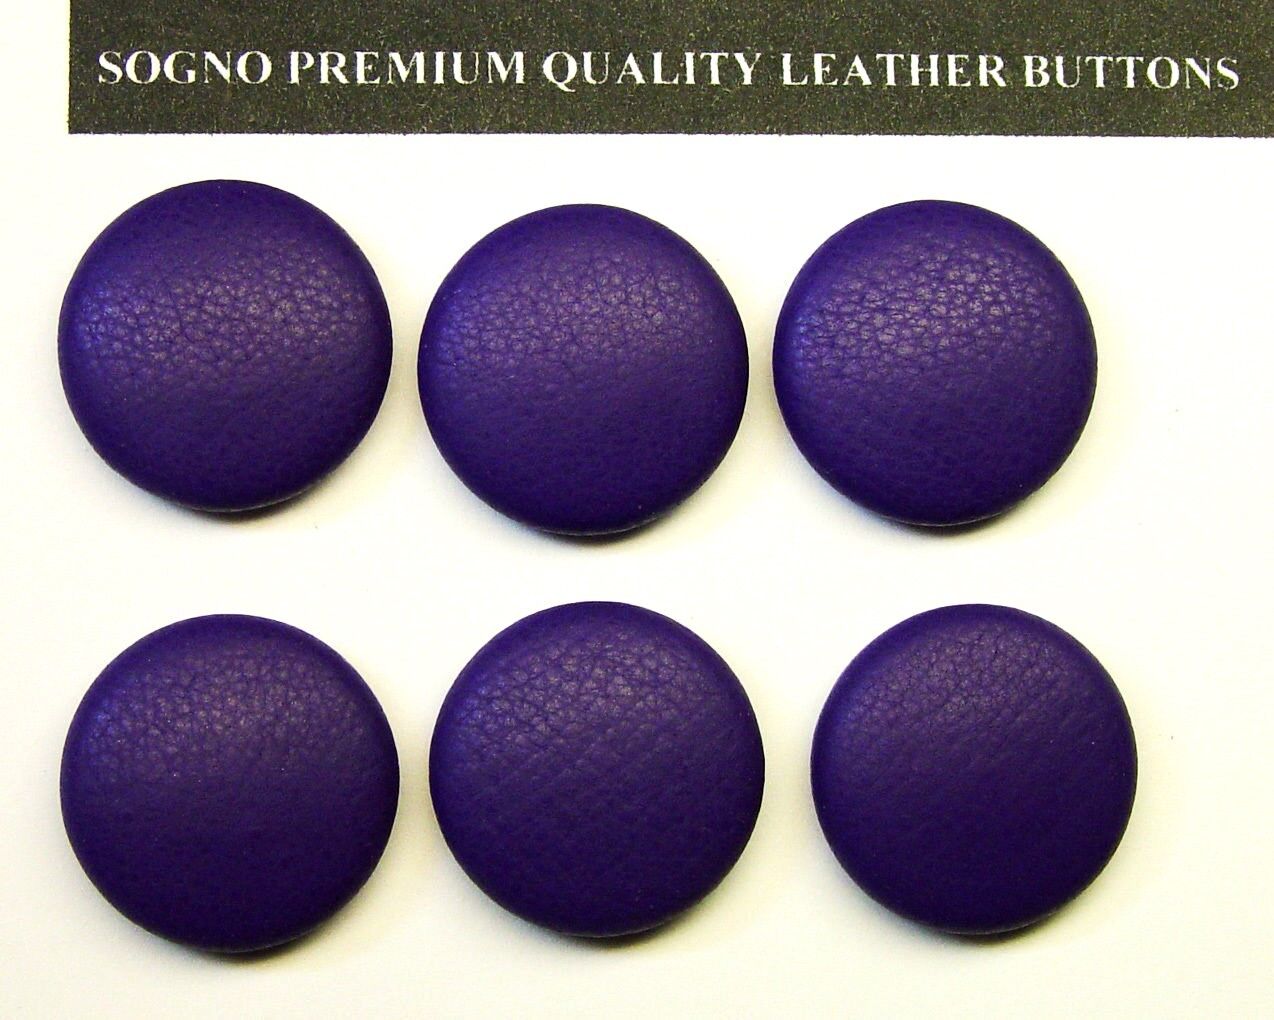 6 REPLACEMENT BUTTONS MADE IN USA FOR VINTAGE OUTFITS 23 MM SOFT PURPLE LEATHER